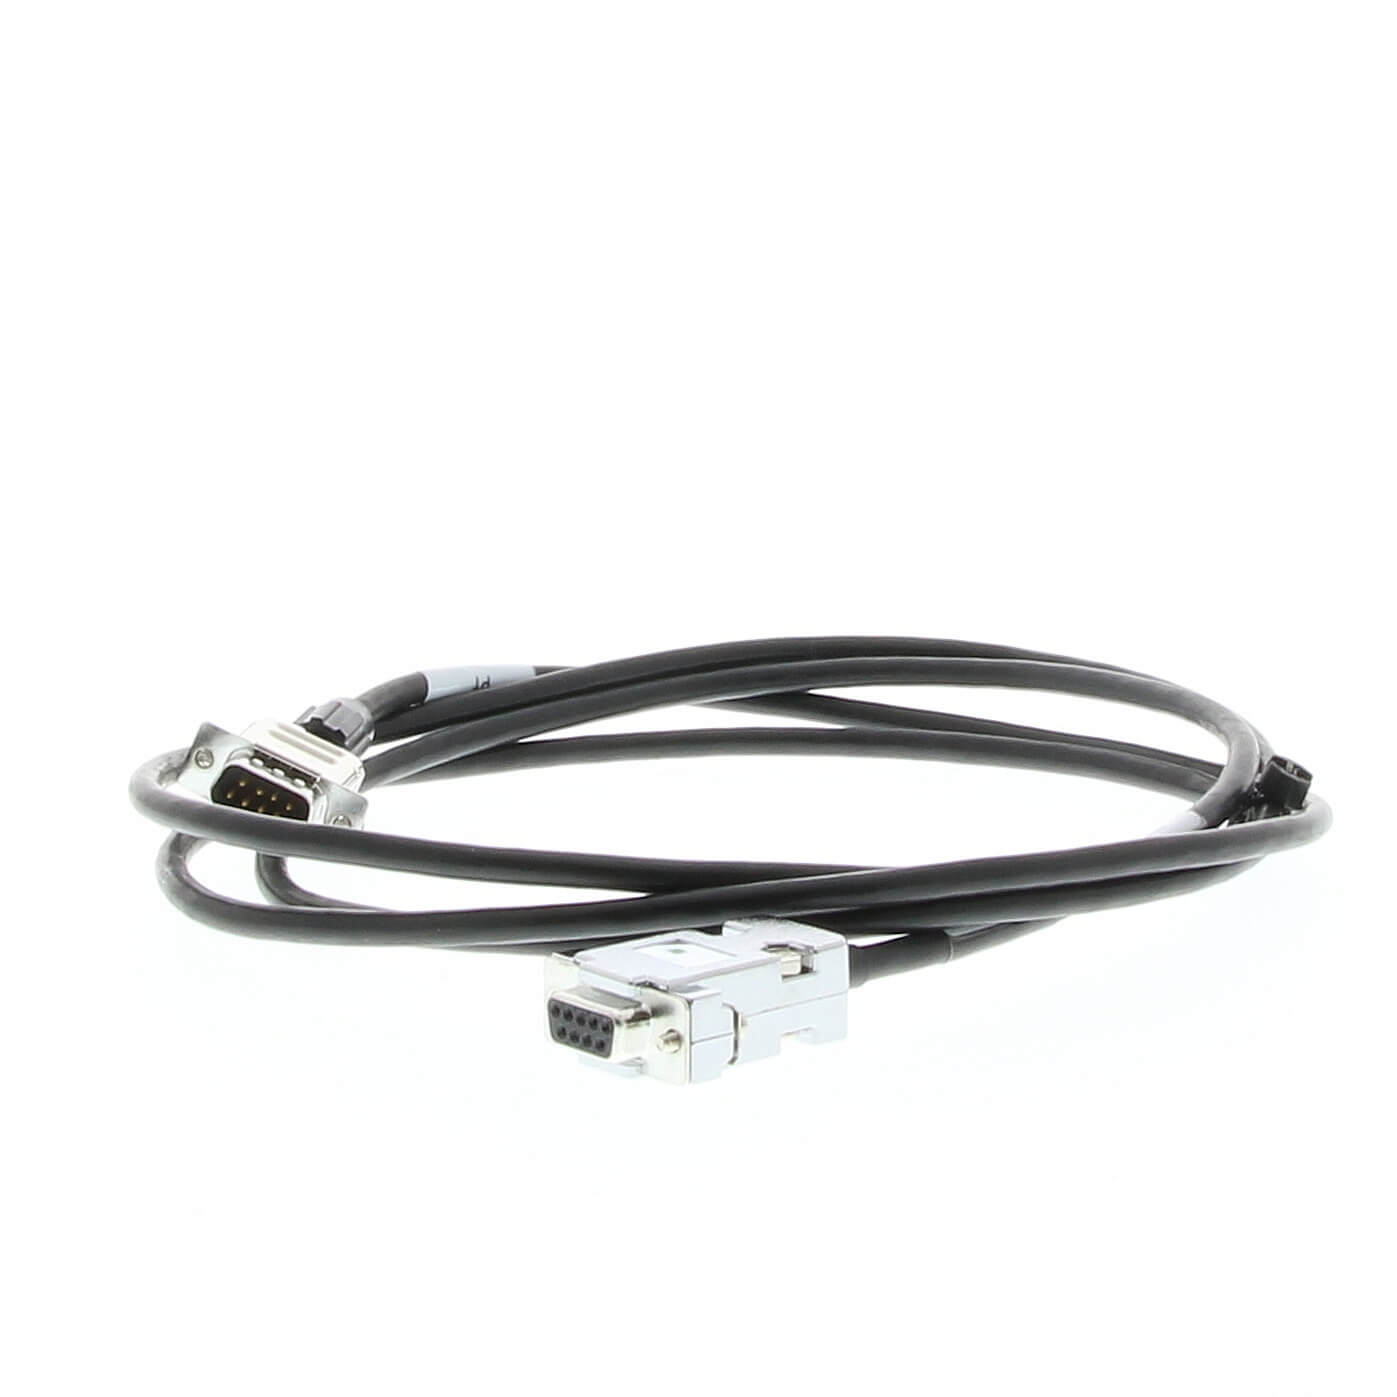 RS-232C Communication Cable between PC and PLC/HMI